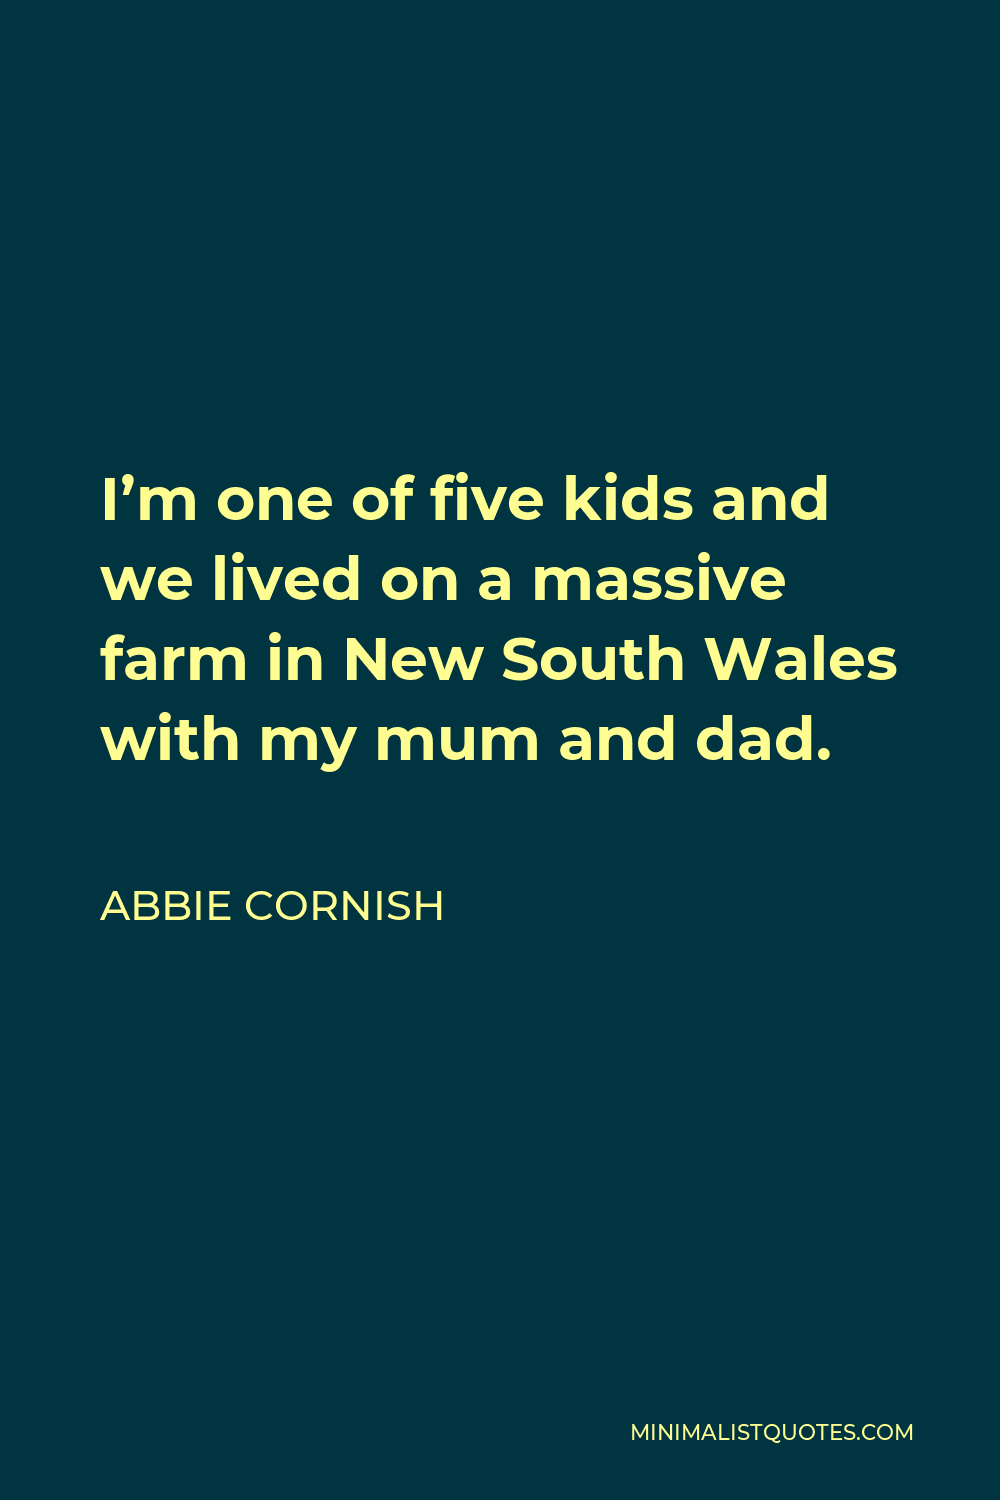 Abbie Cornish Quote - I’m one of five kids and we lived on a massive farm in New South Wales with my mum and dad.